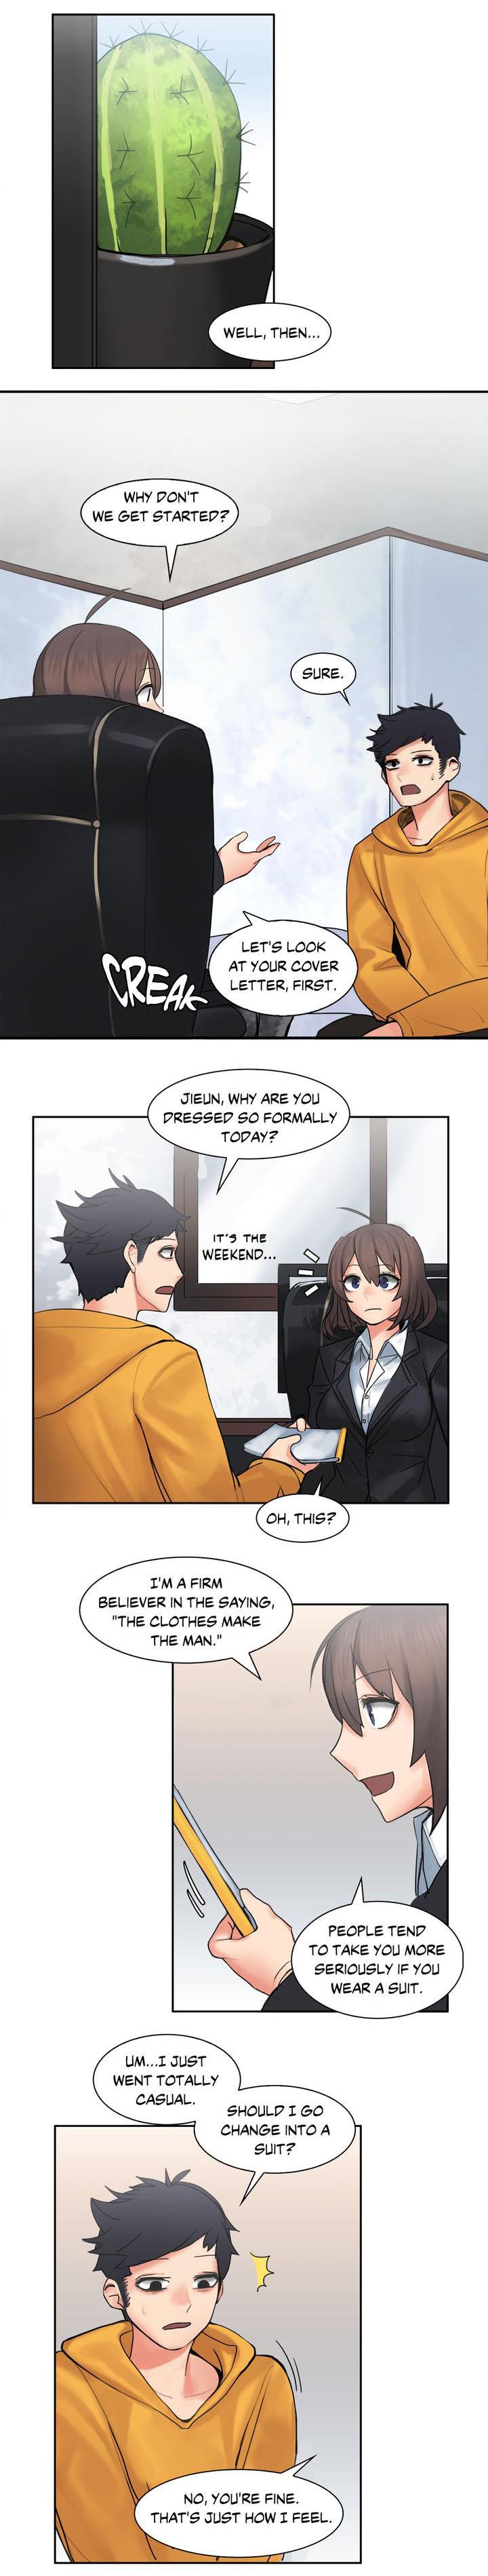 The Girl That Got Stuck in the Wall Ch.6/11 55